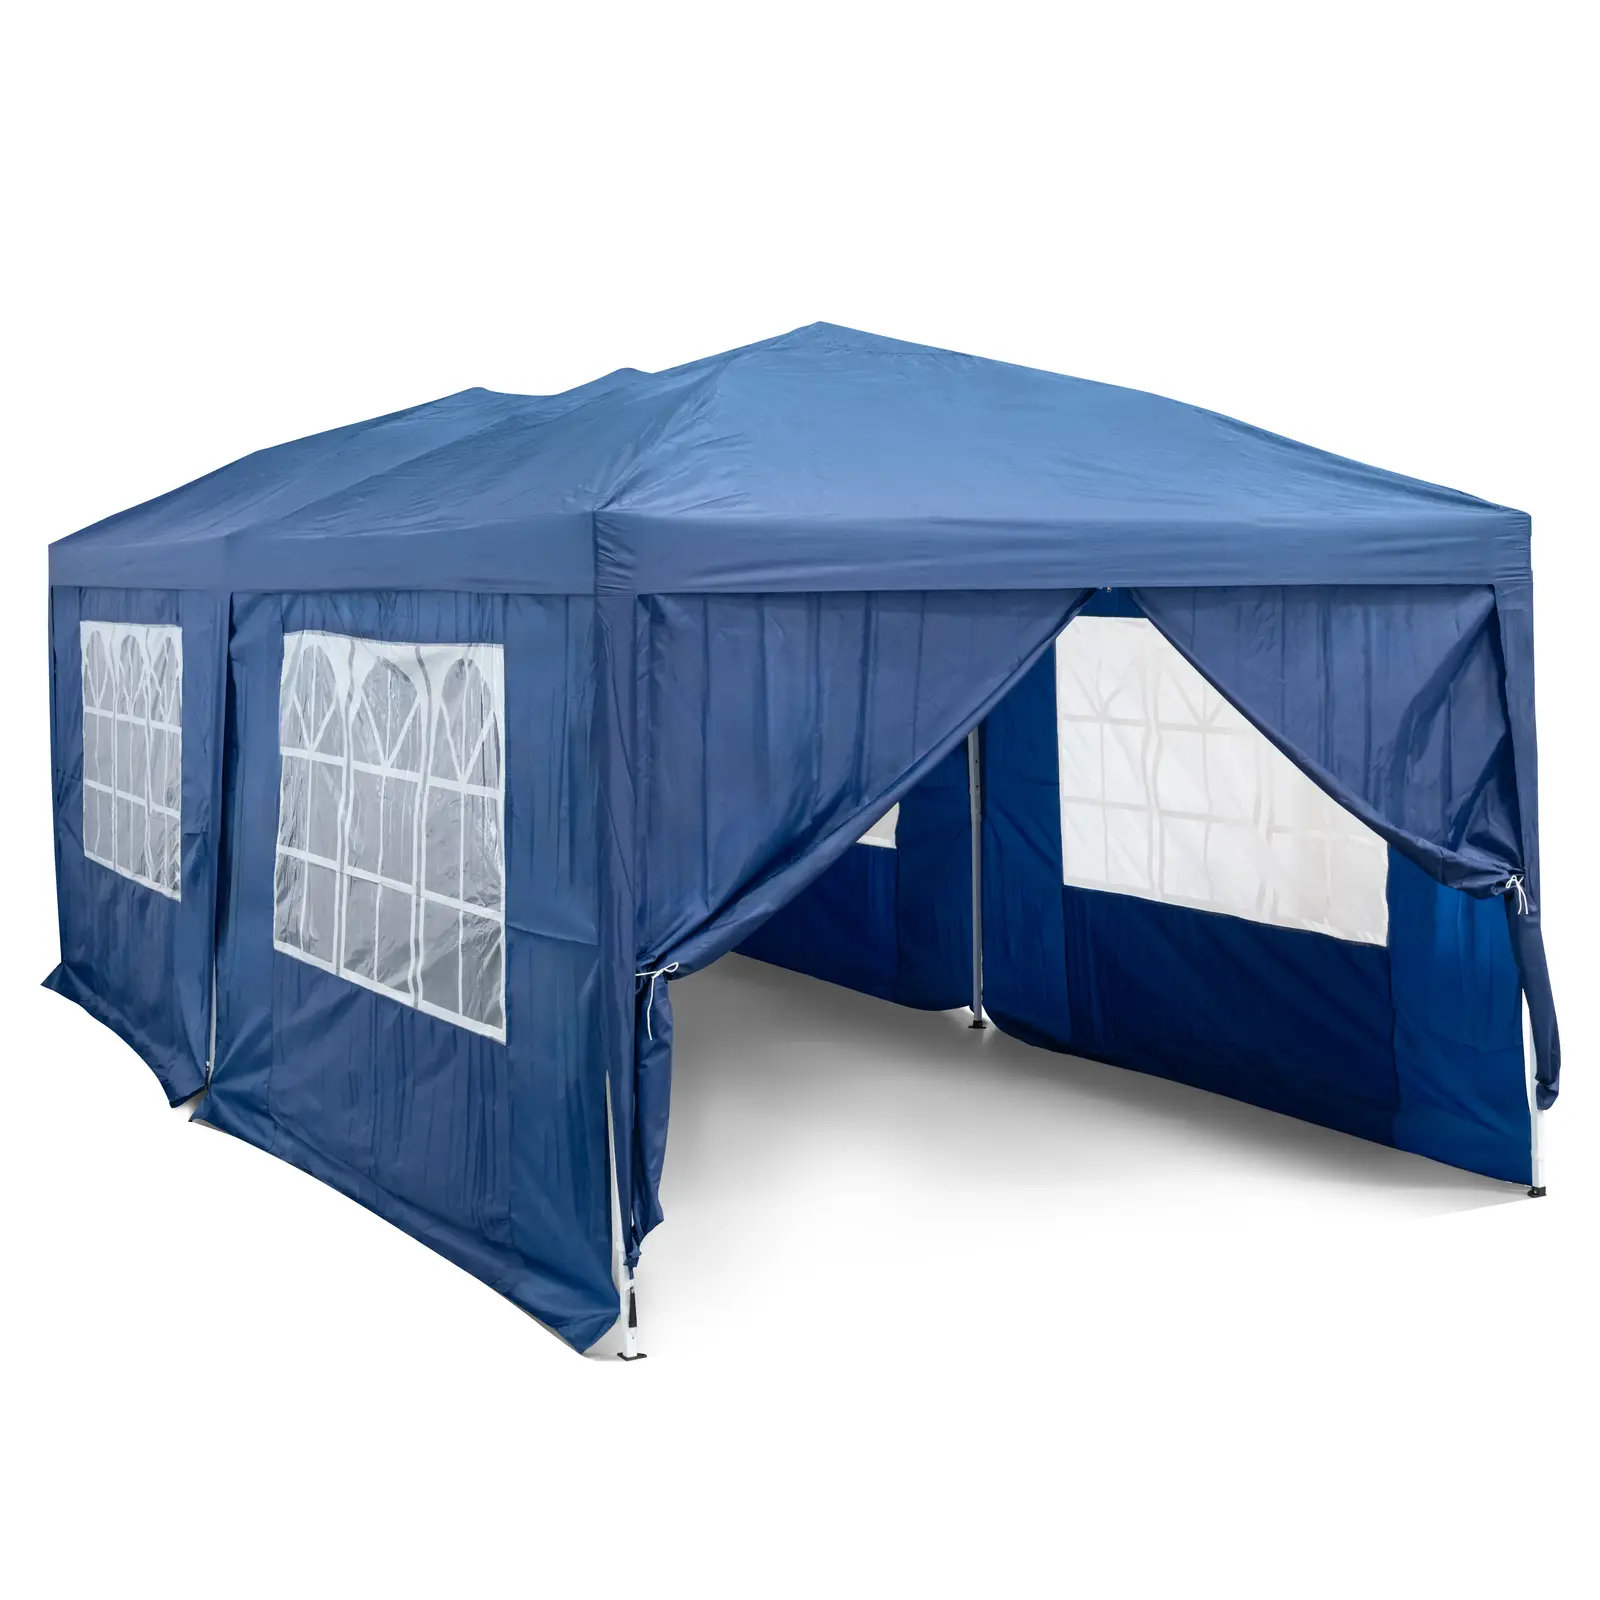 Pop Up Gazebo with Roof and Side Walls - 3 x 6 m - waterproof cover